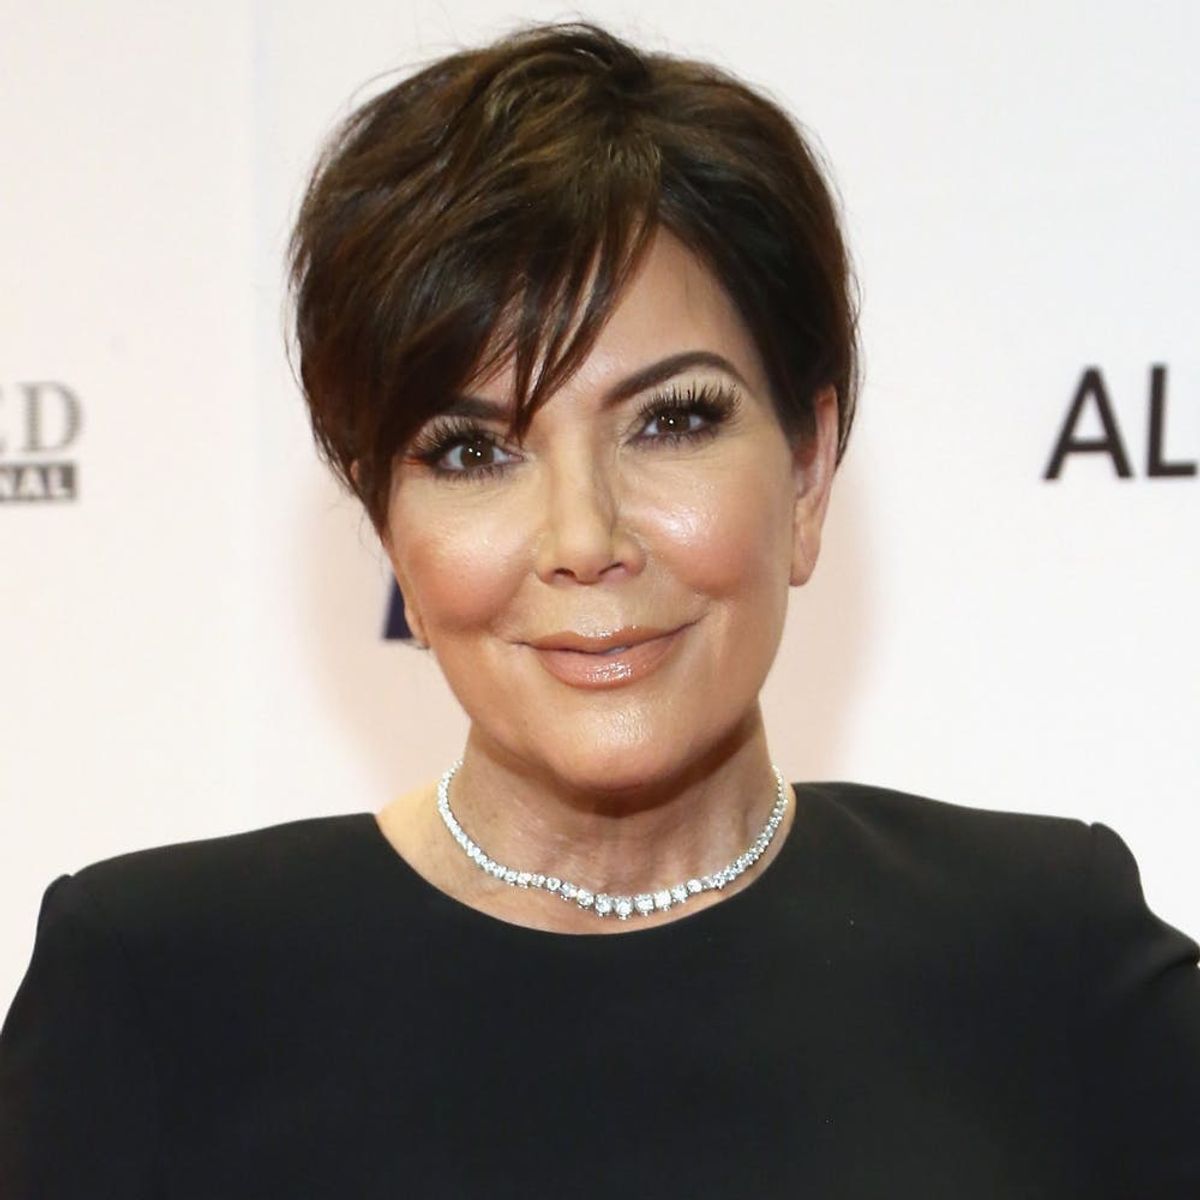 Kris Jenner’s 2017 Christmas Decorations Are Just as Extra as You’d Imagine